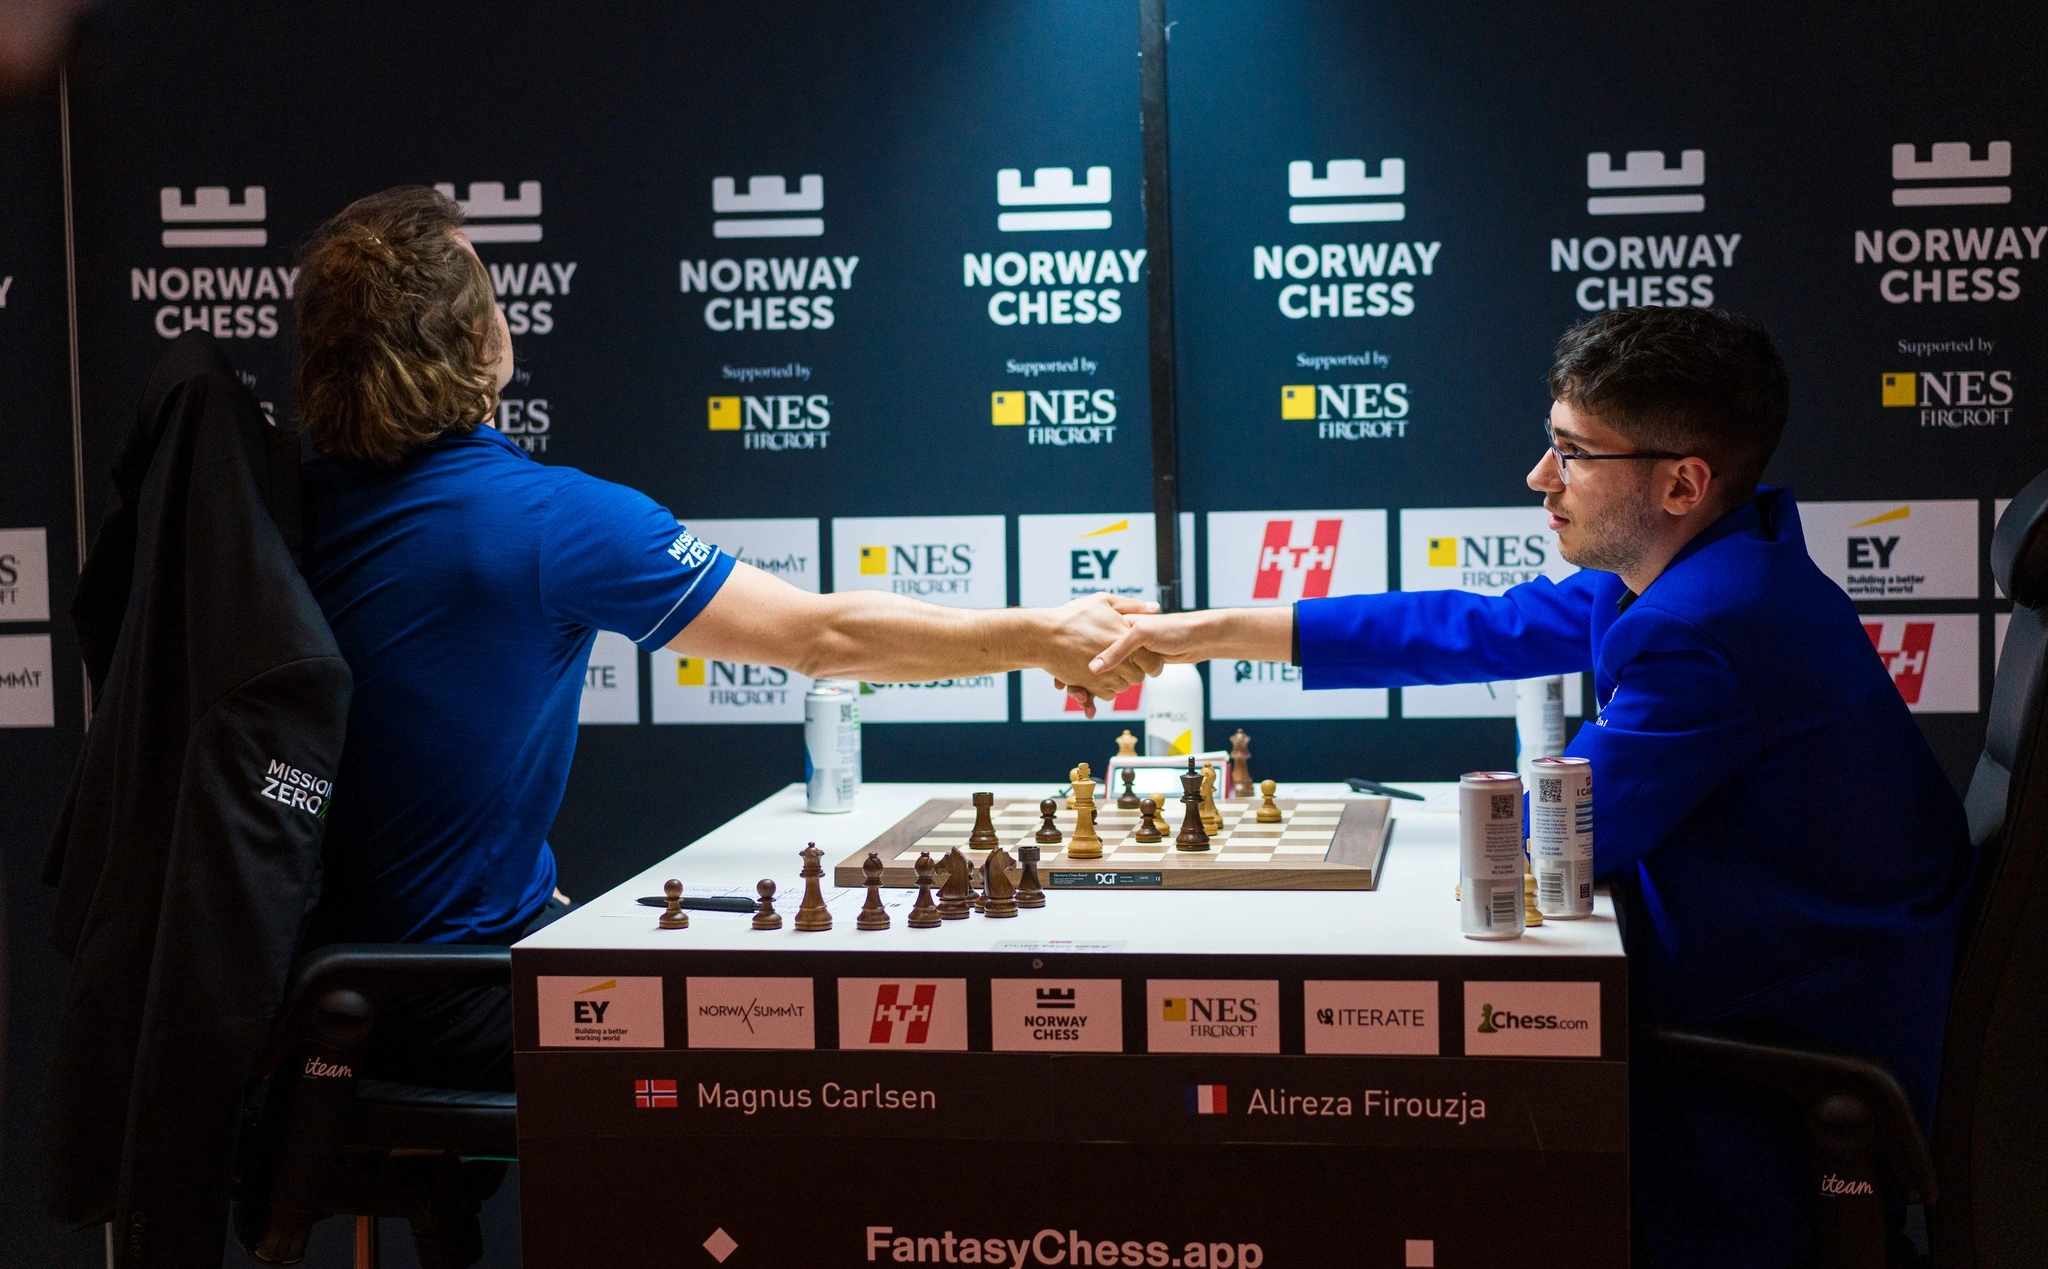 Norway Chess 2023 – Day 8 live video coverage - Chess Topics